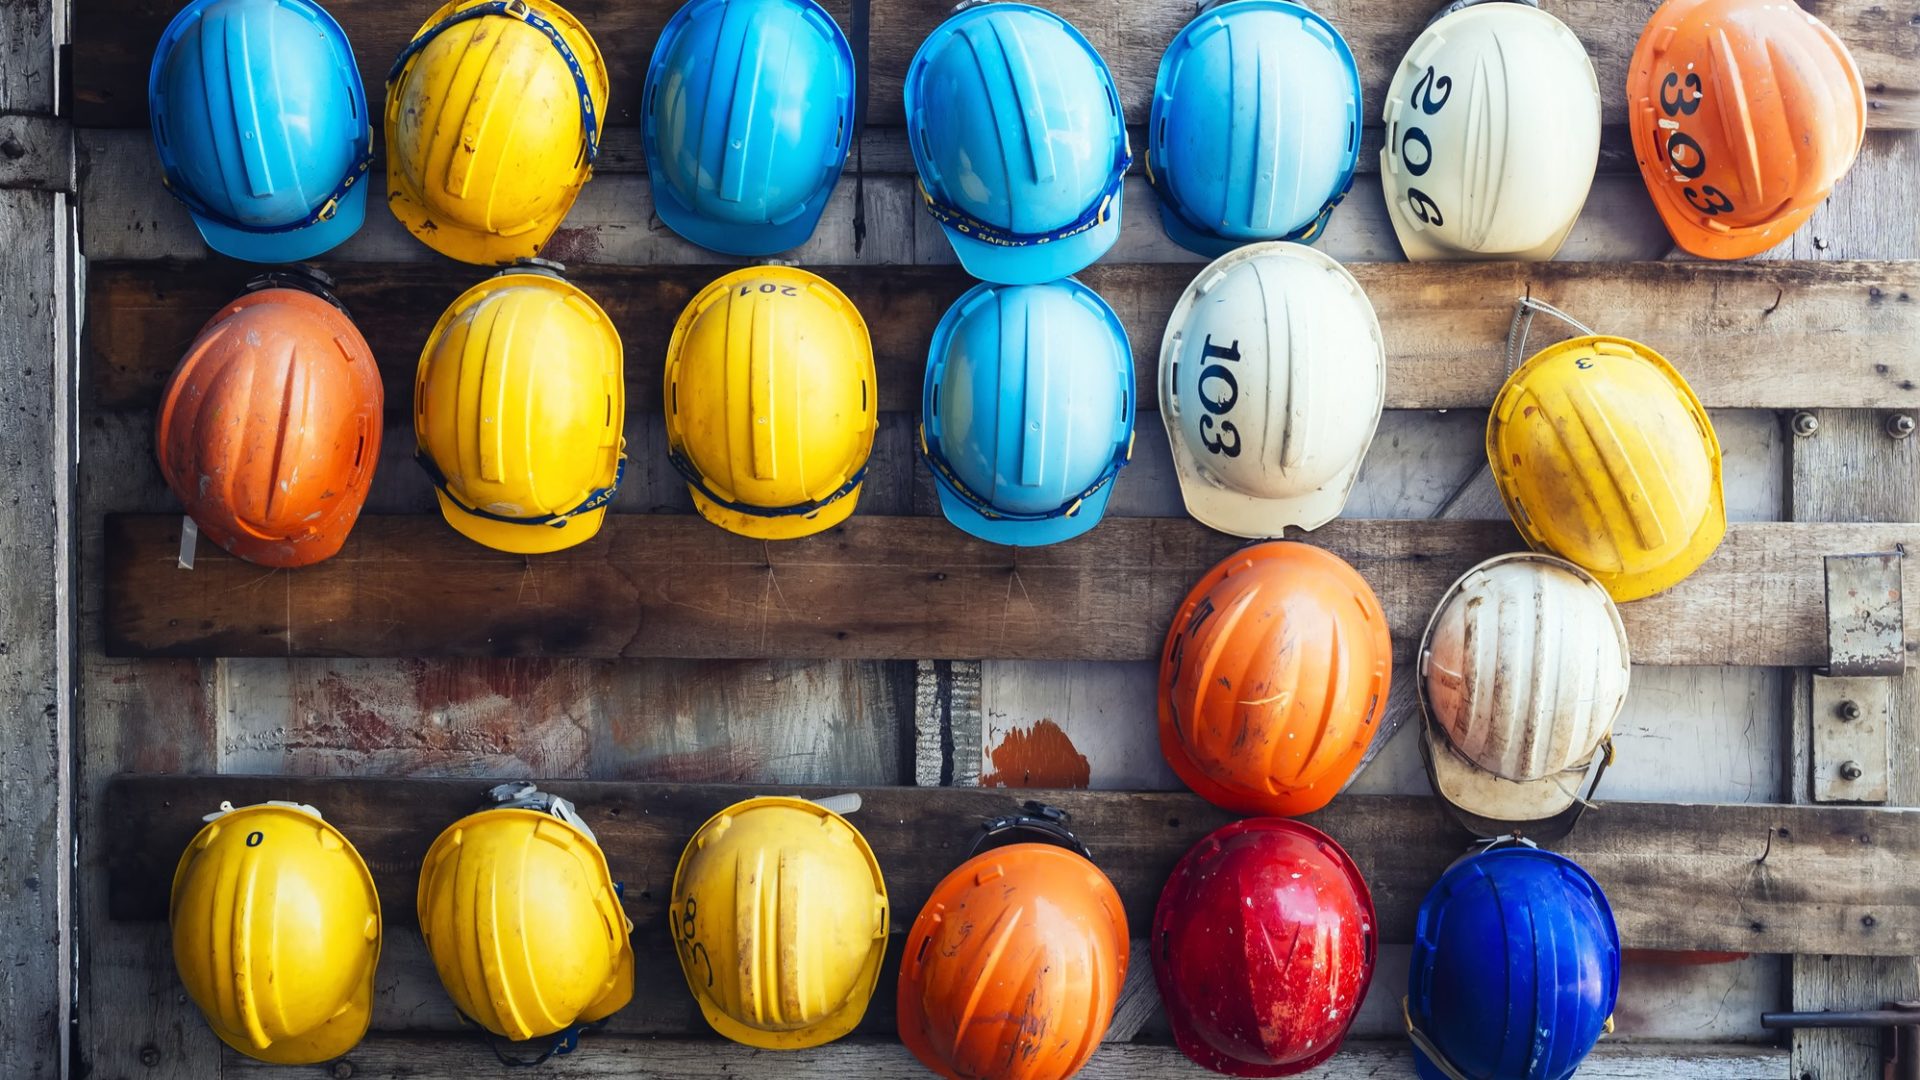 Fairness inclusion and respect in construction